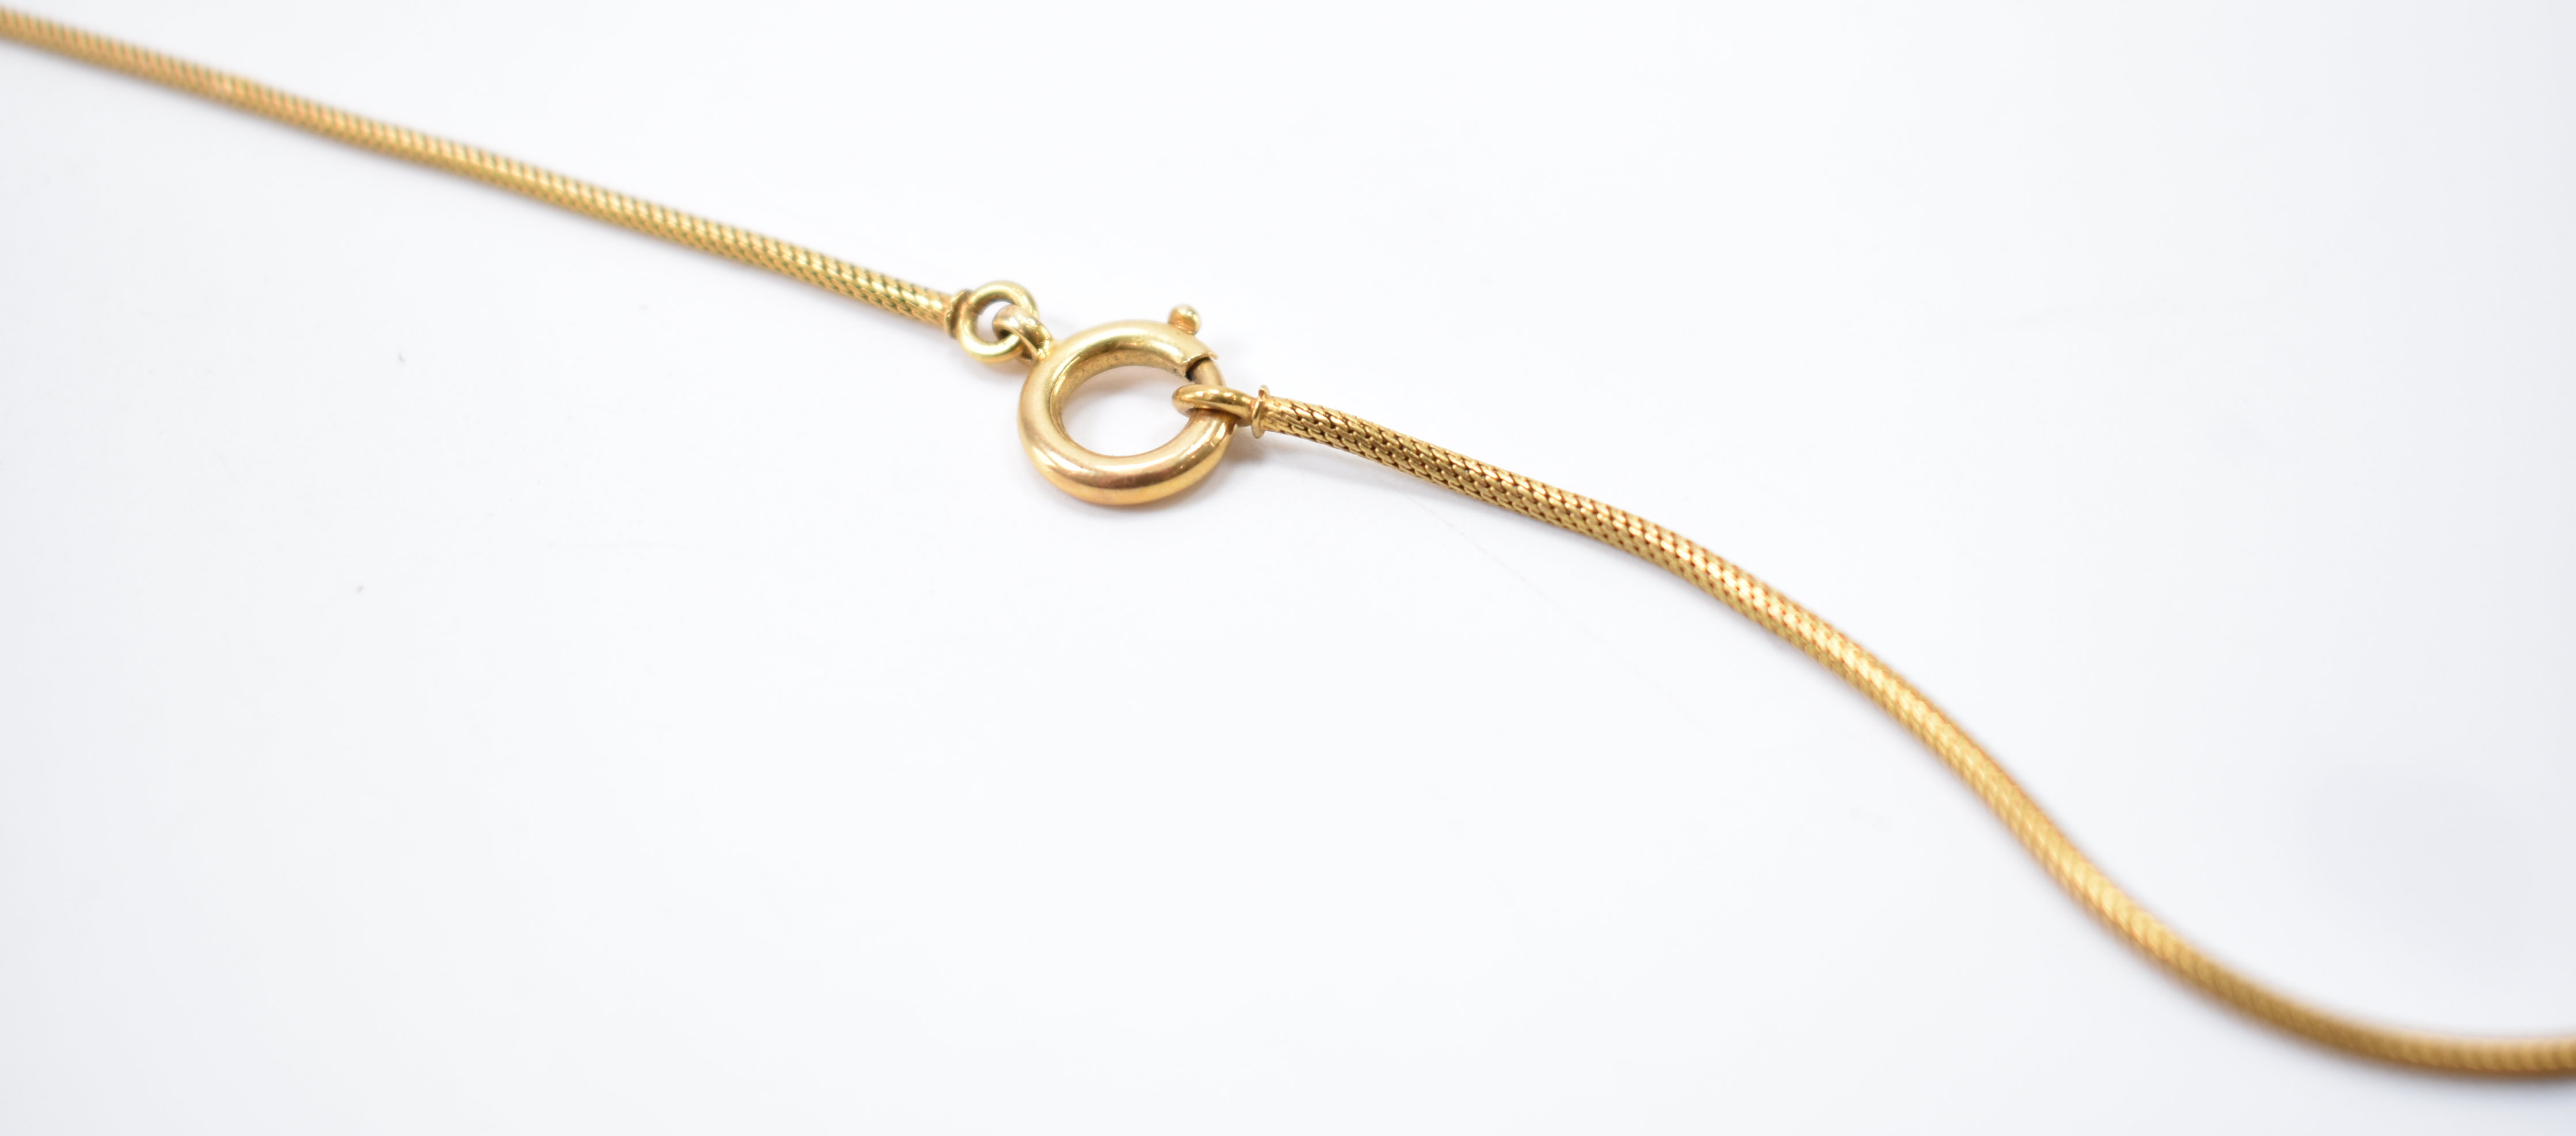 EARLY 20TH CENTURY GOLD NECKLACE CHAIN - Image 5 of 5